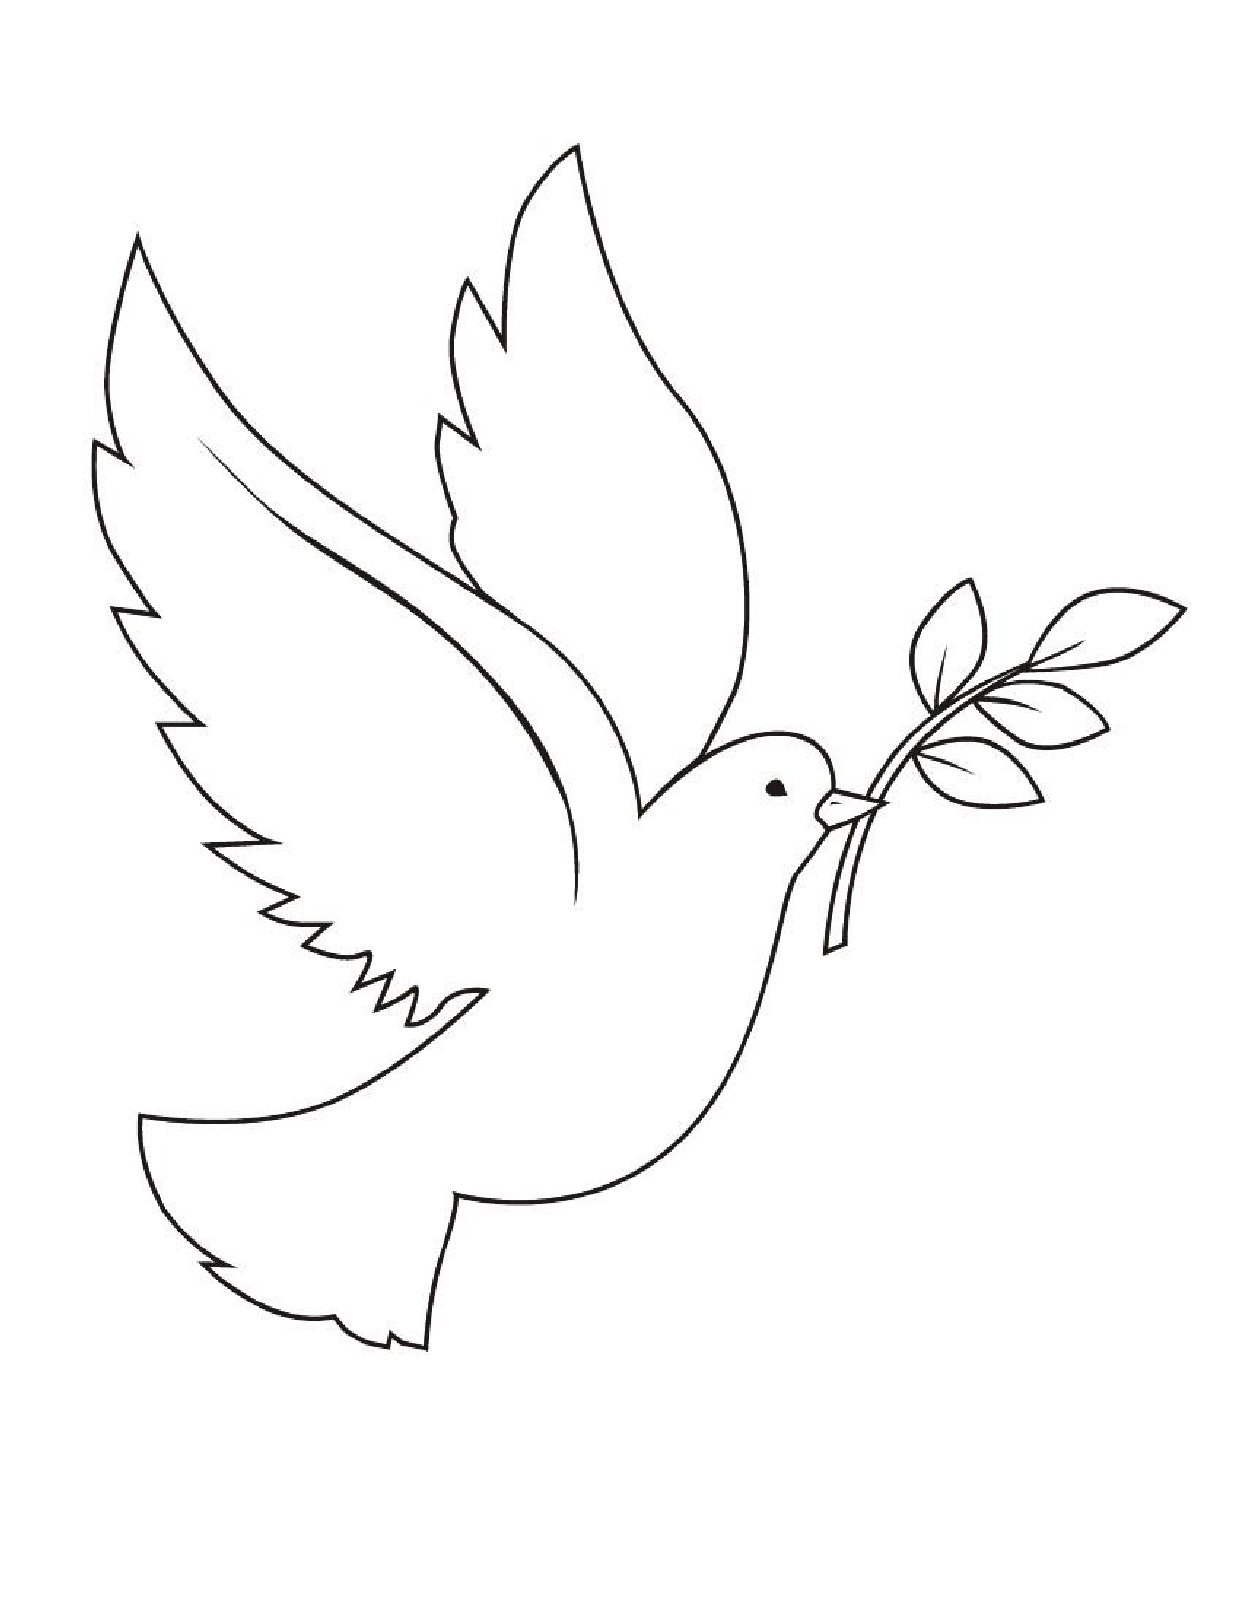 Pigeon with small branch on its beak Coloring Page - Free Printable